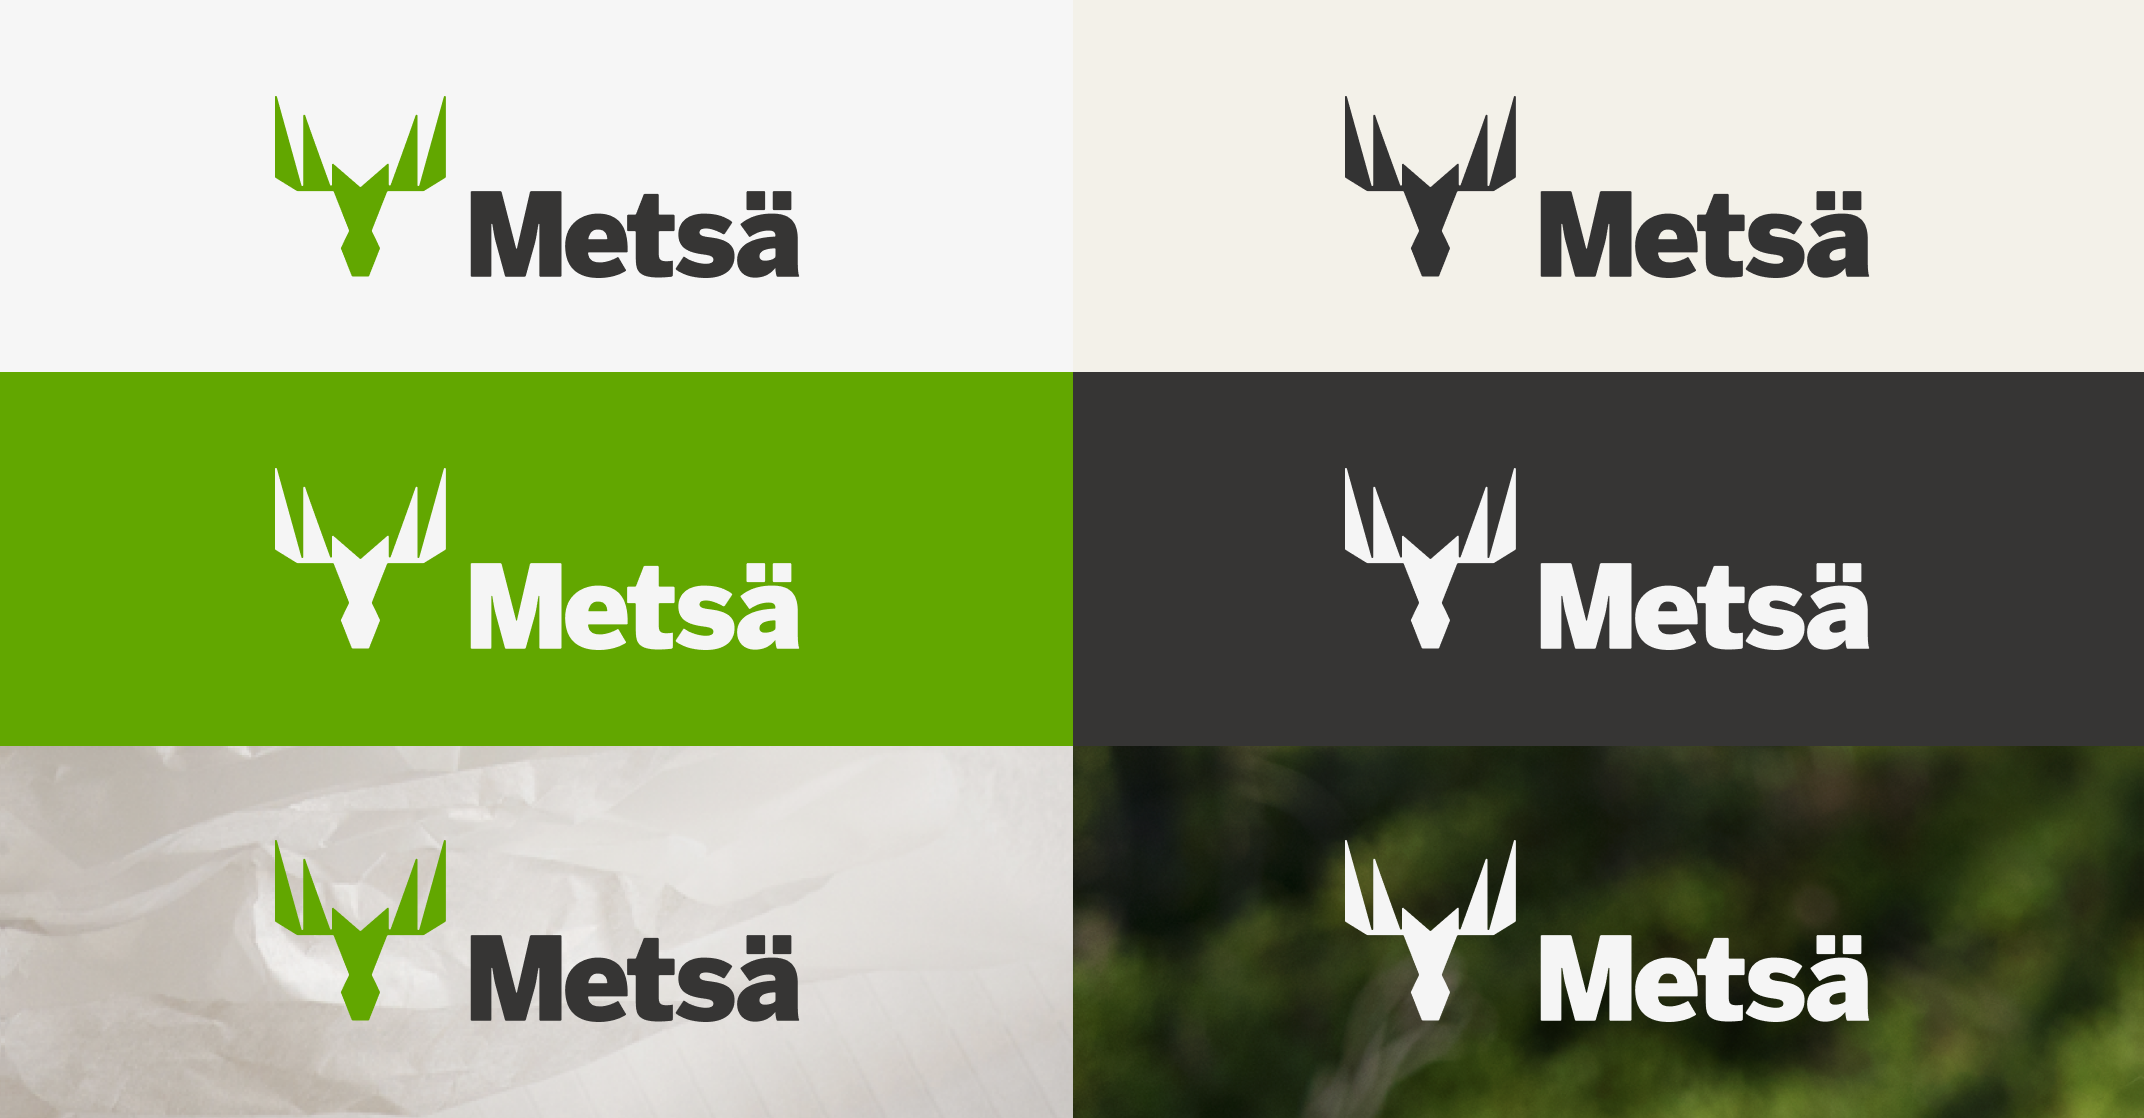 Logo versions on different colour and image backgrounds